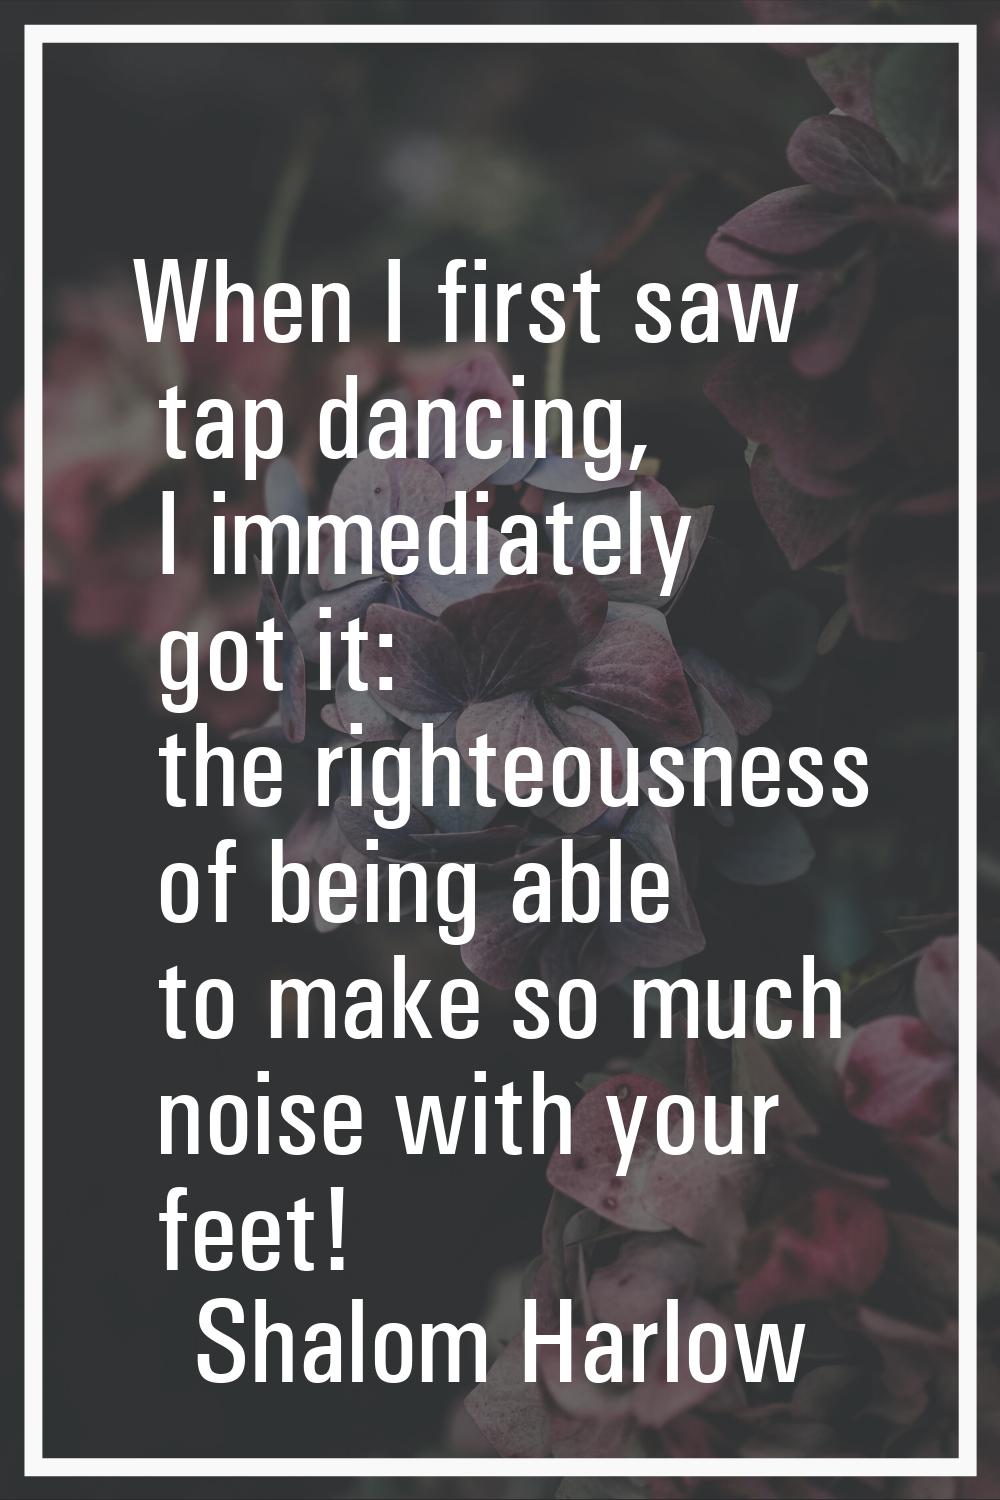 When I first saw tap dancing, I immediately got it: the righteousness of being able to make so much